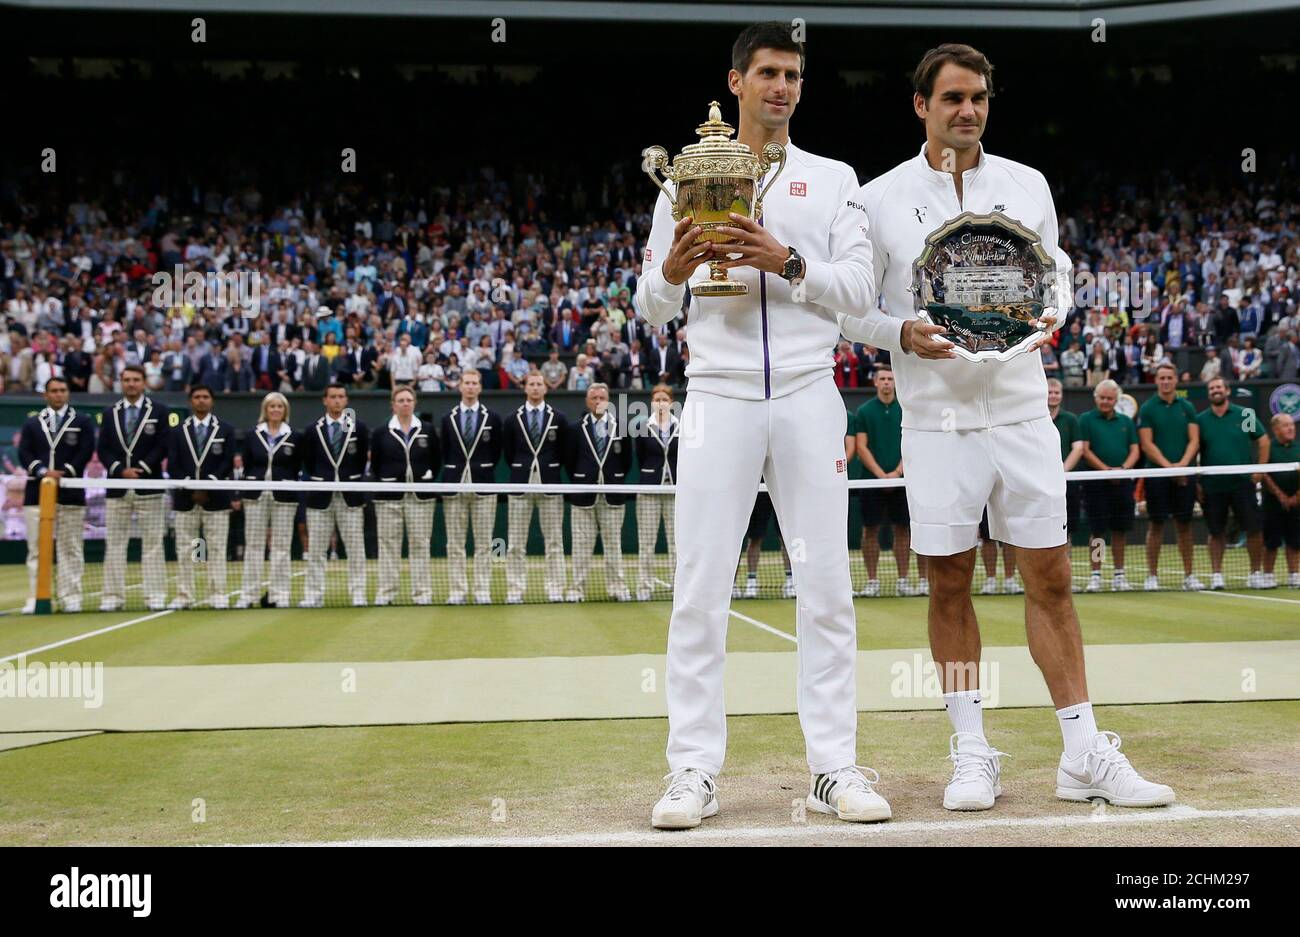 Wimbledon Singles Winner High Resolution Stock Photography and Images -  Alamy